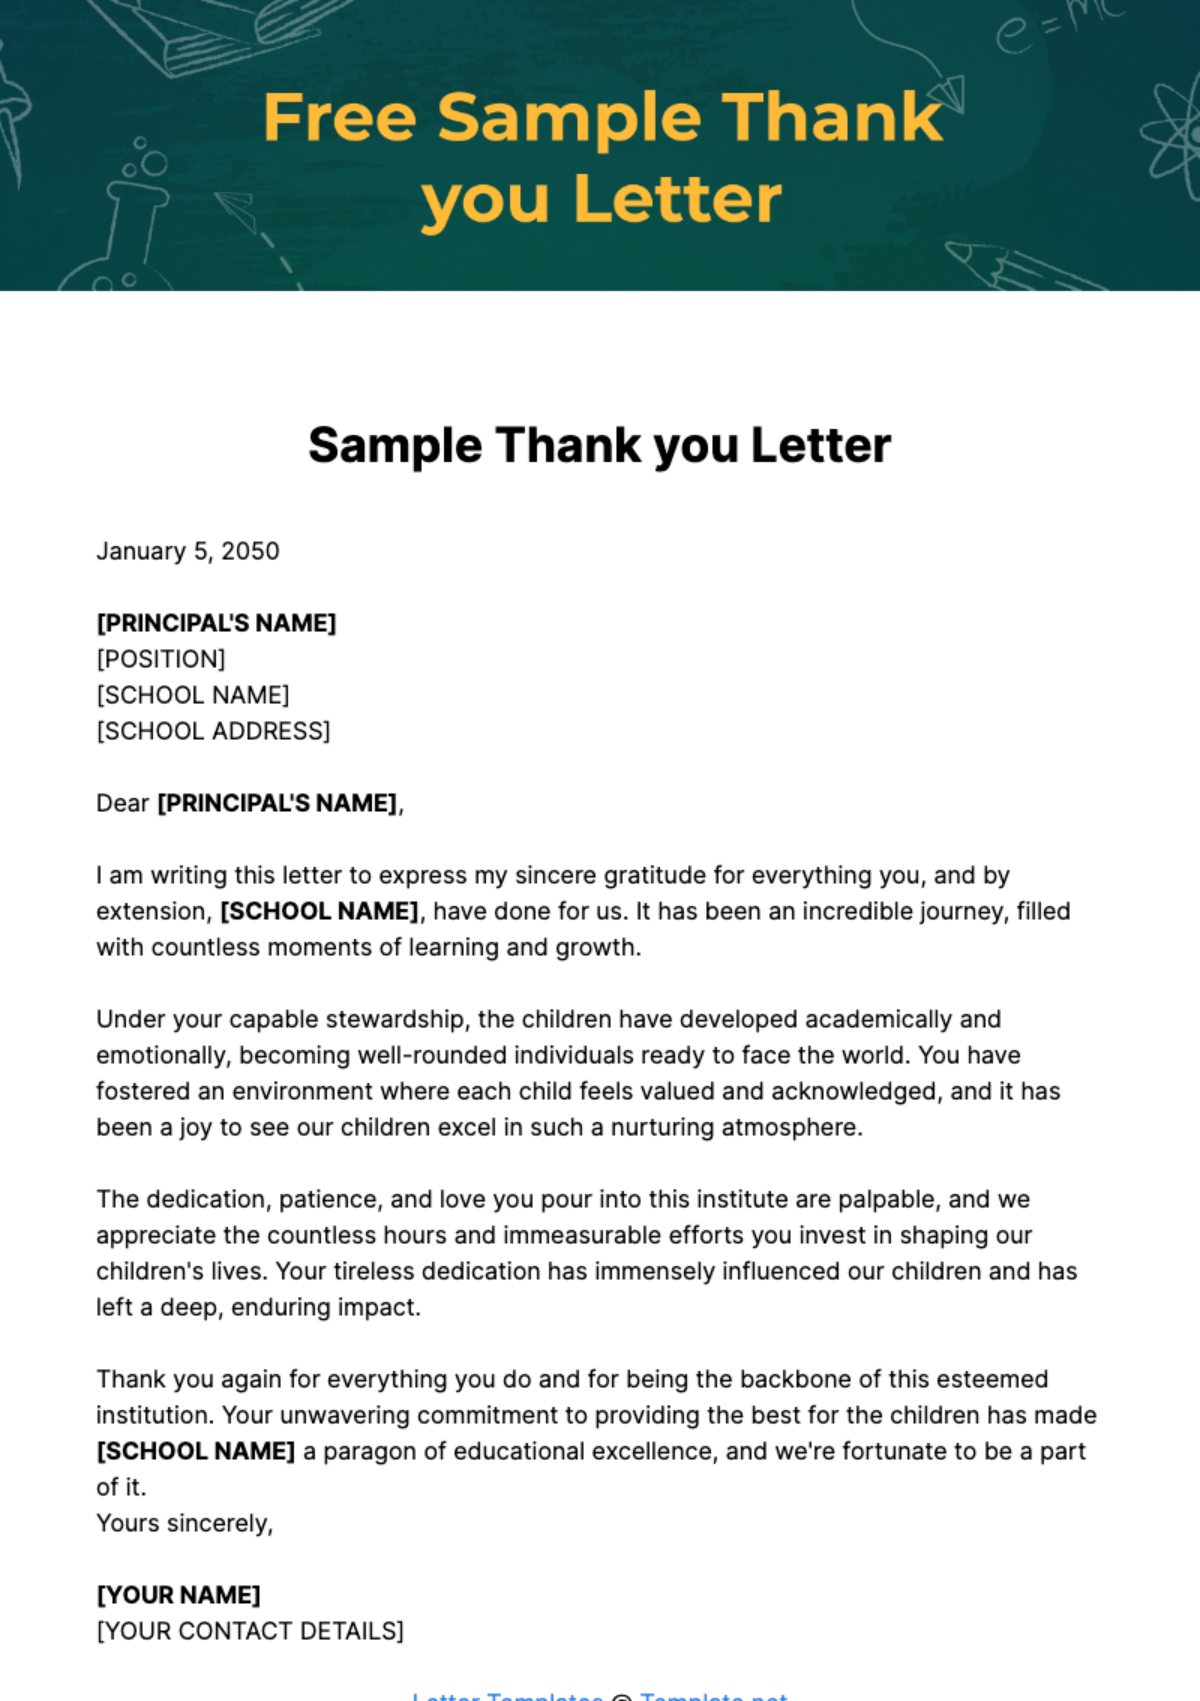 Free Sample Thank you Letter Template